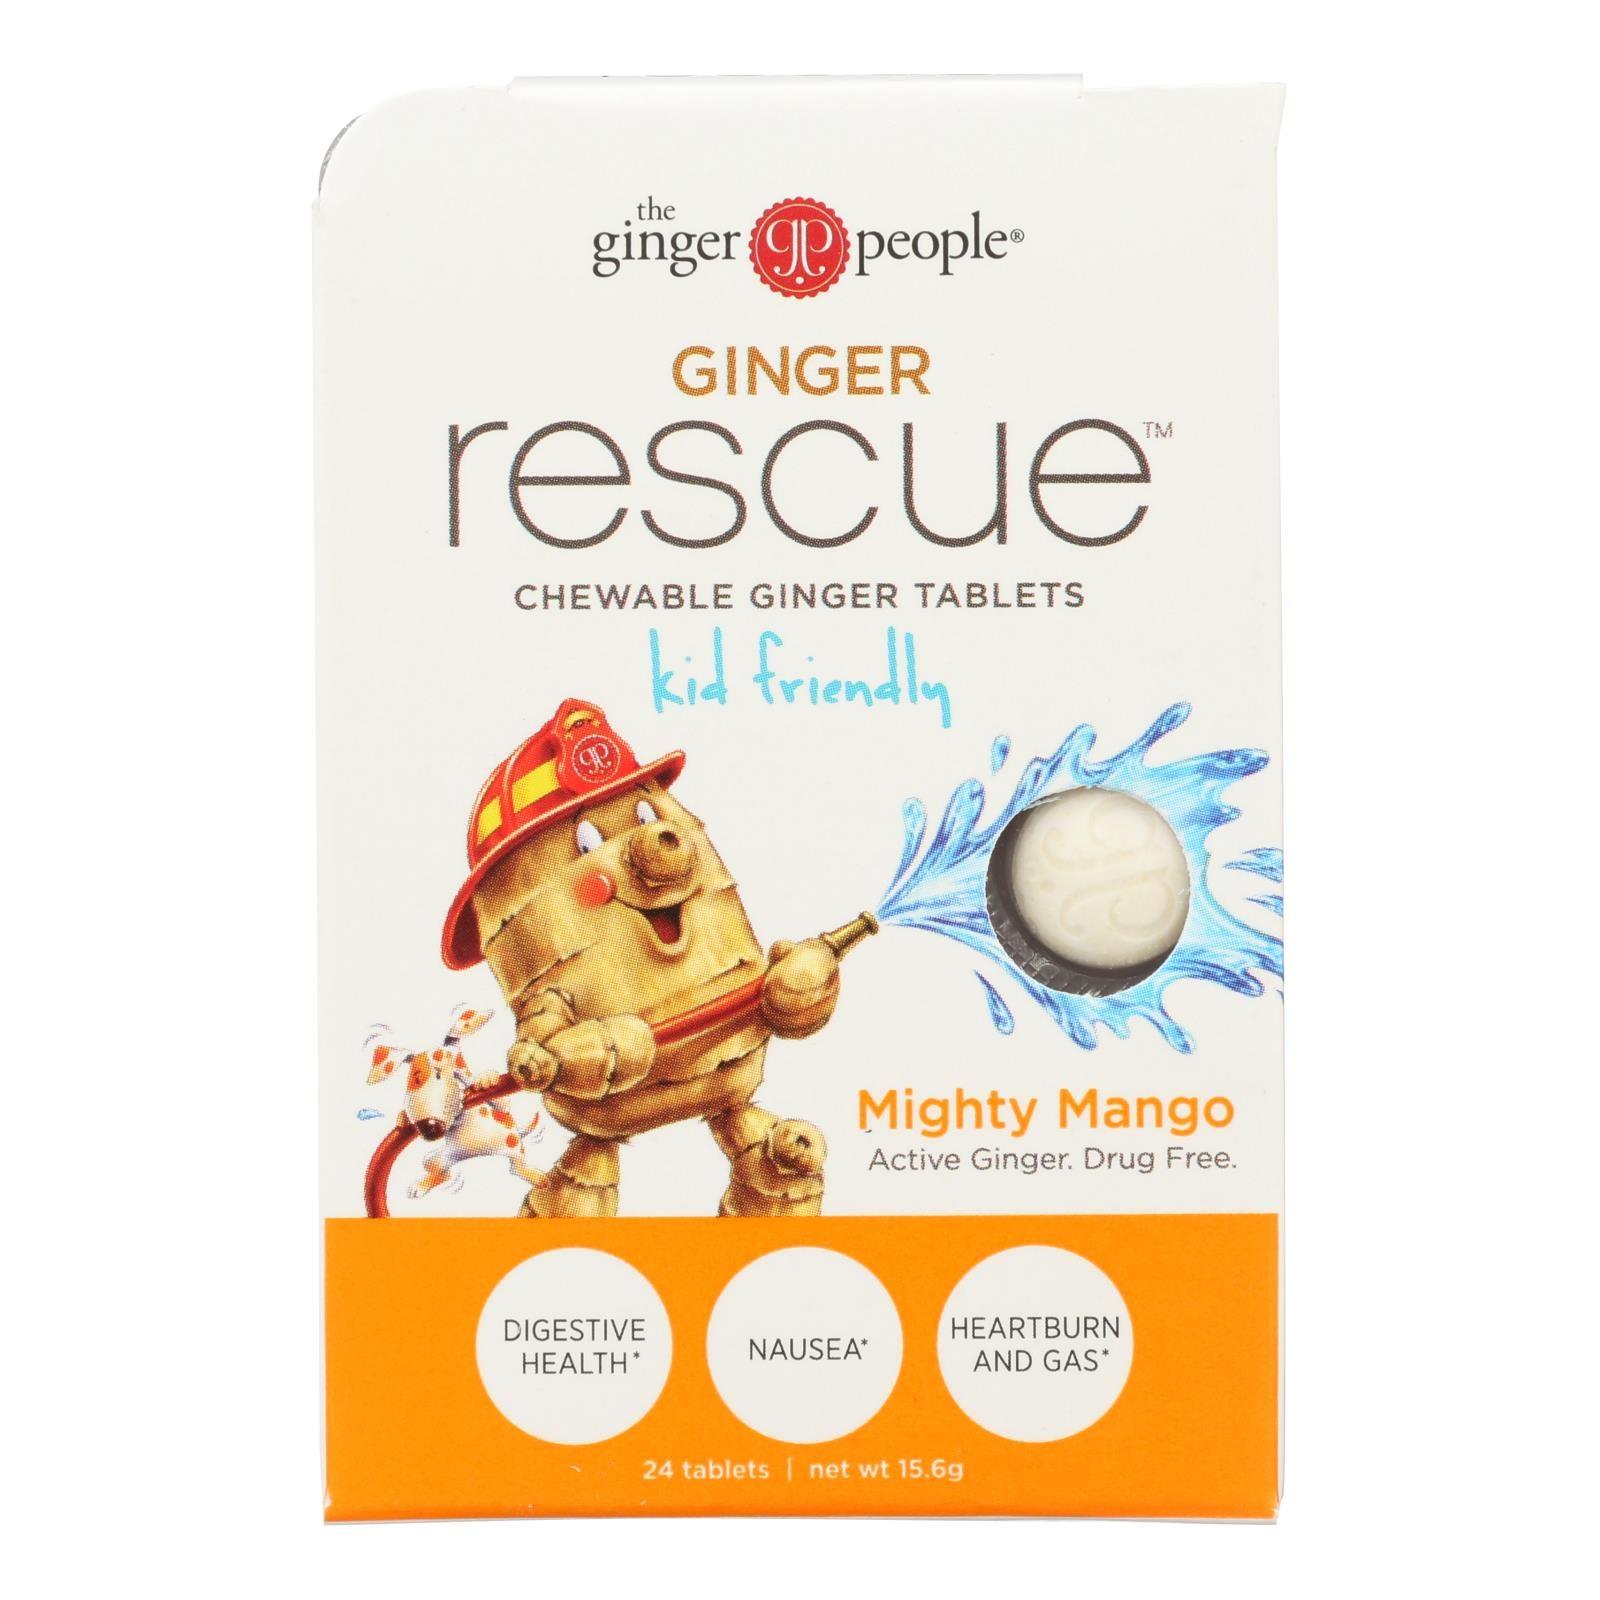 Ginger People Ginger Rescue For Kids - Mighty Mango - 24 Chewable Tablets - Case Of 10 - Loomini